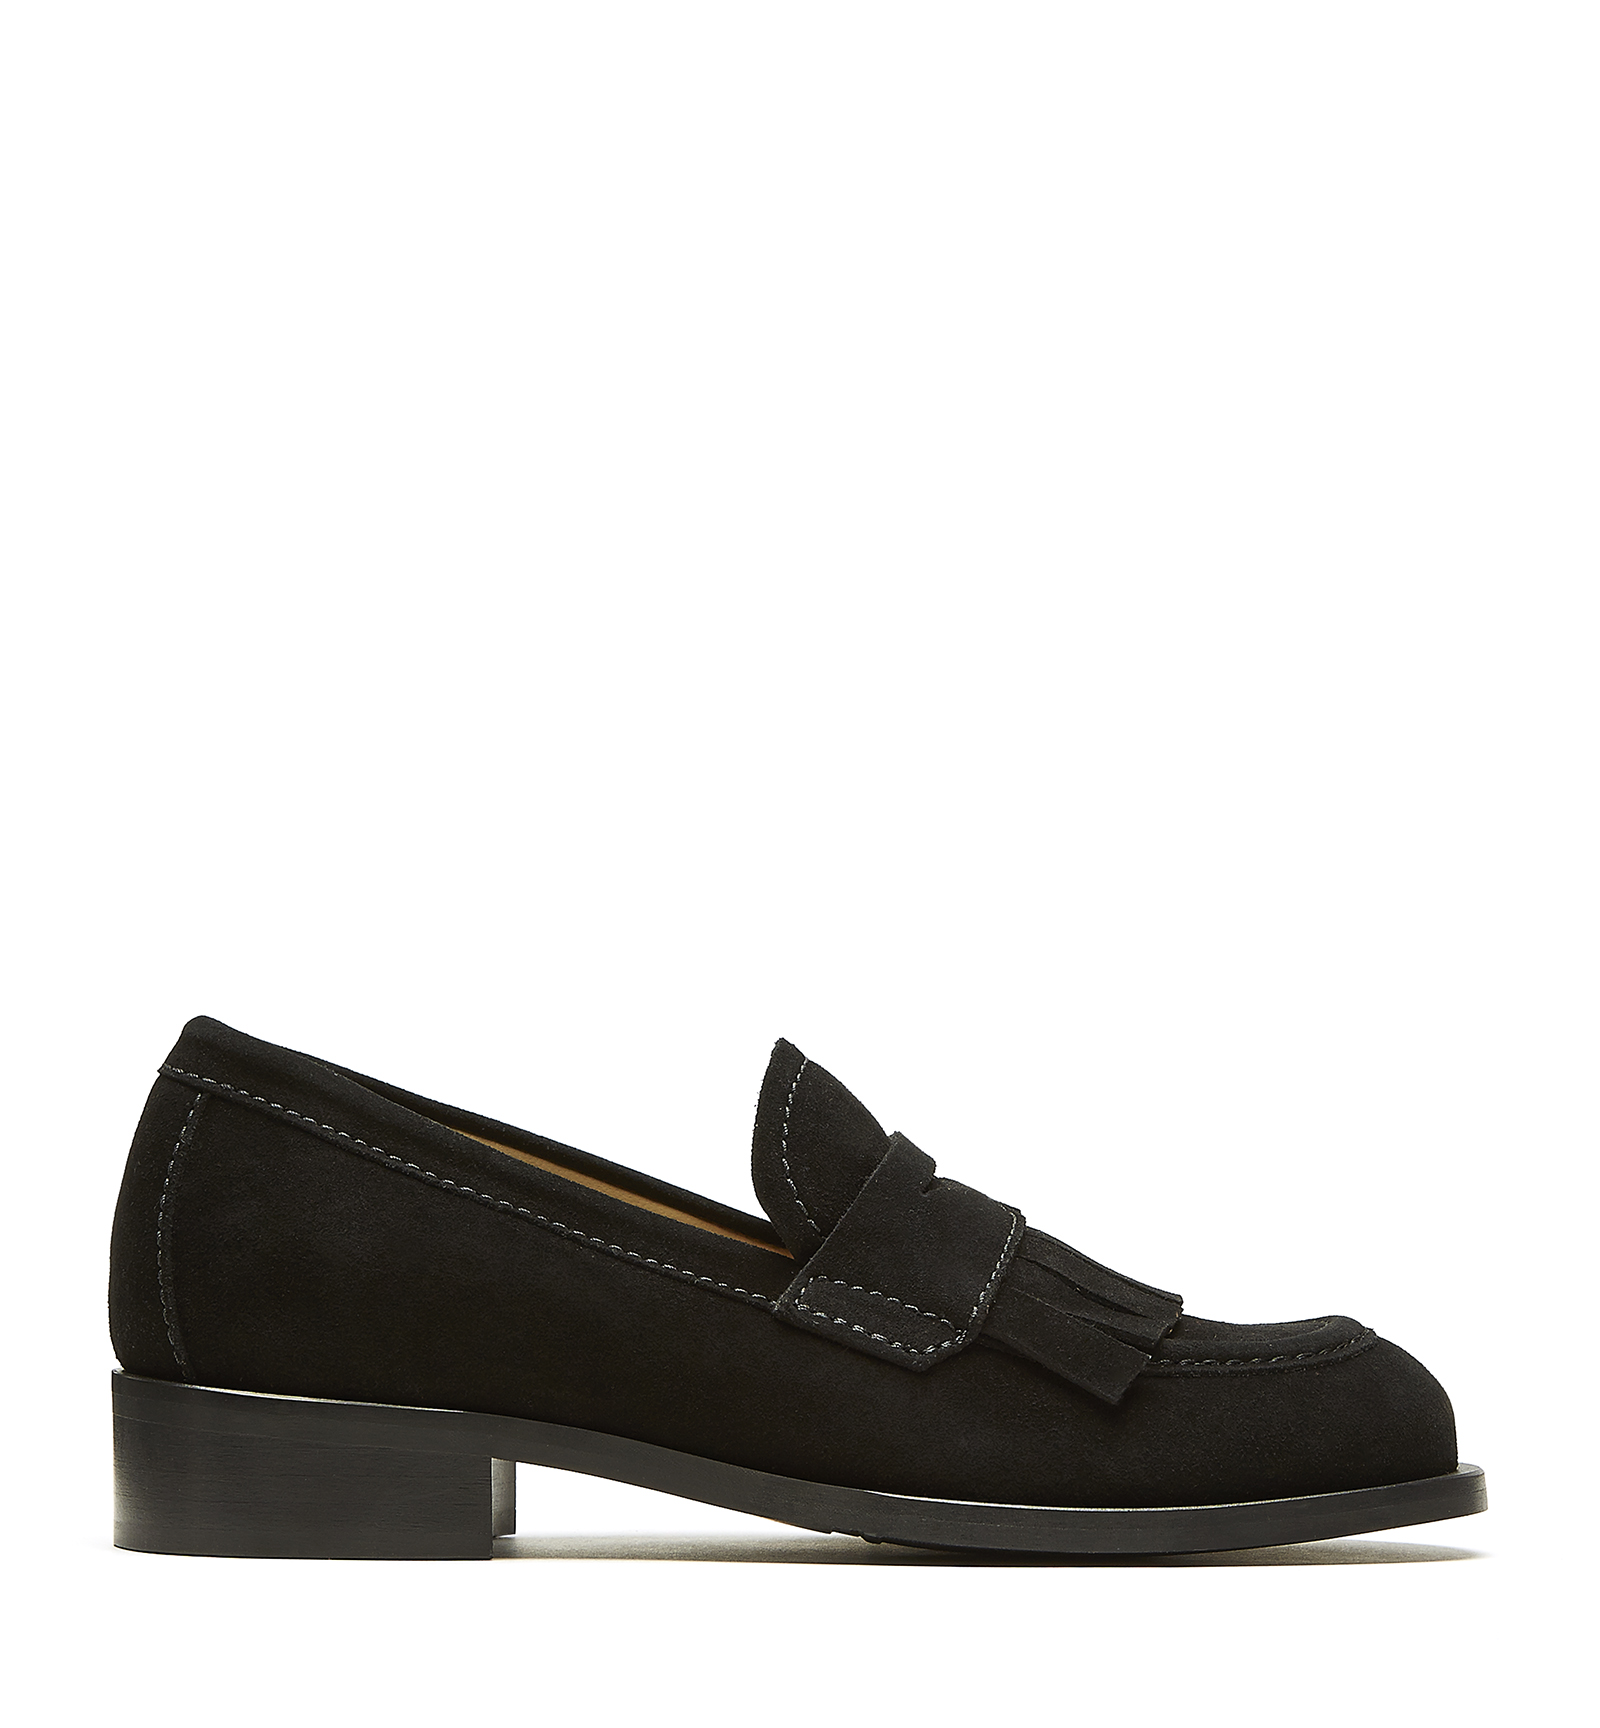 La Canadienne Danny Suede Loafer In Black